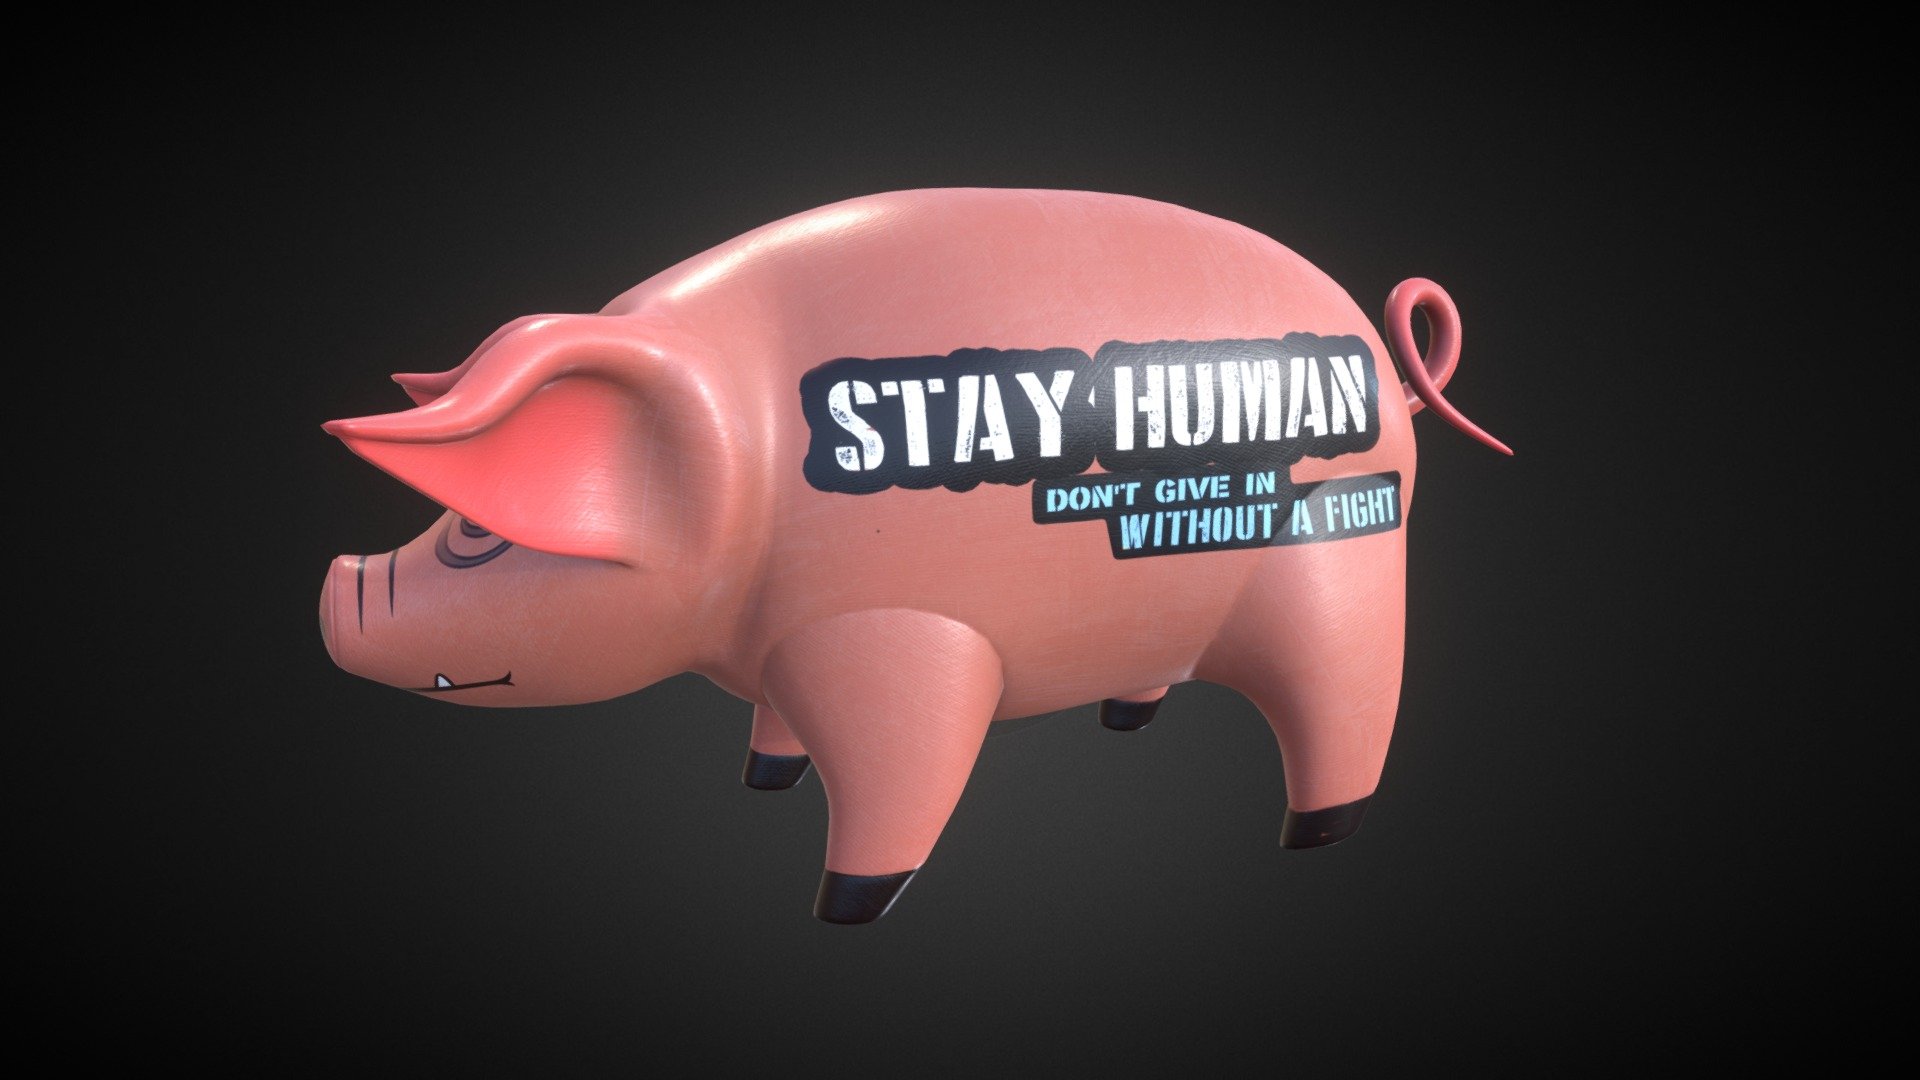 Pig Balloon Pink Floyd - 3D model PBR Materias

4k Textures

Includes version of textures without texts 3d model